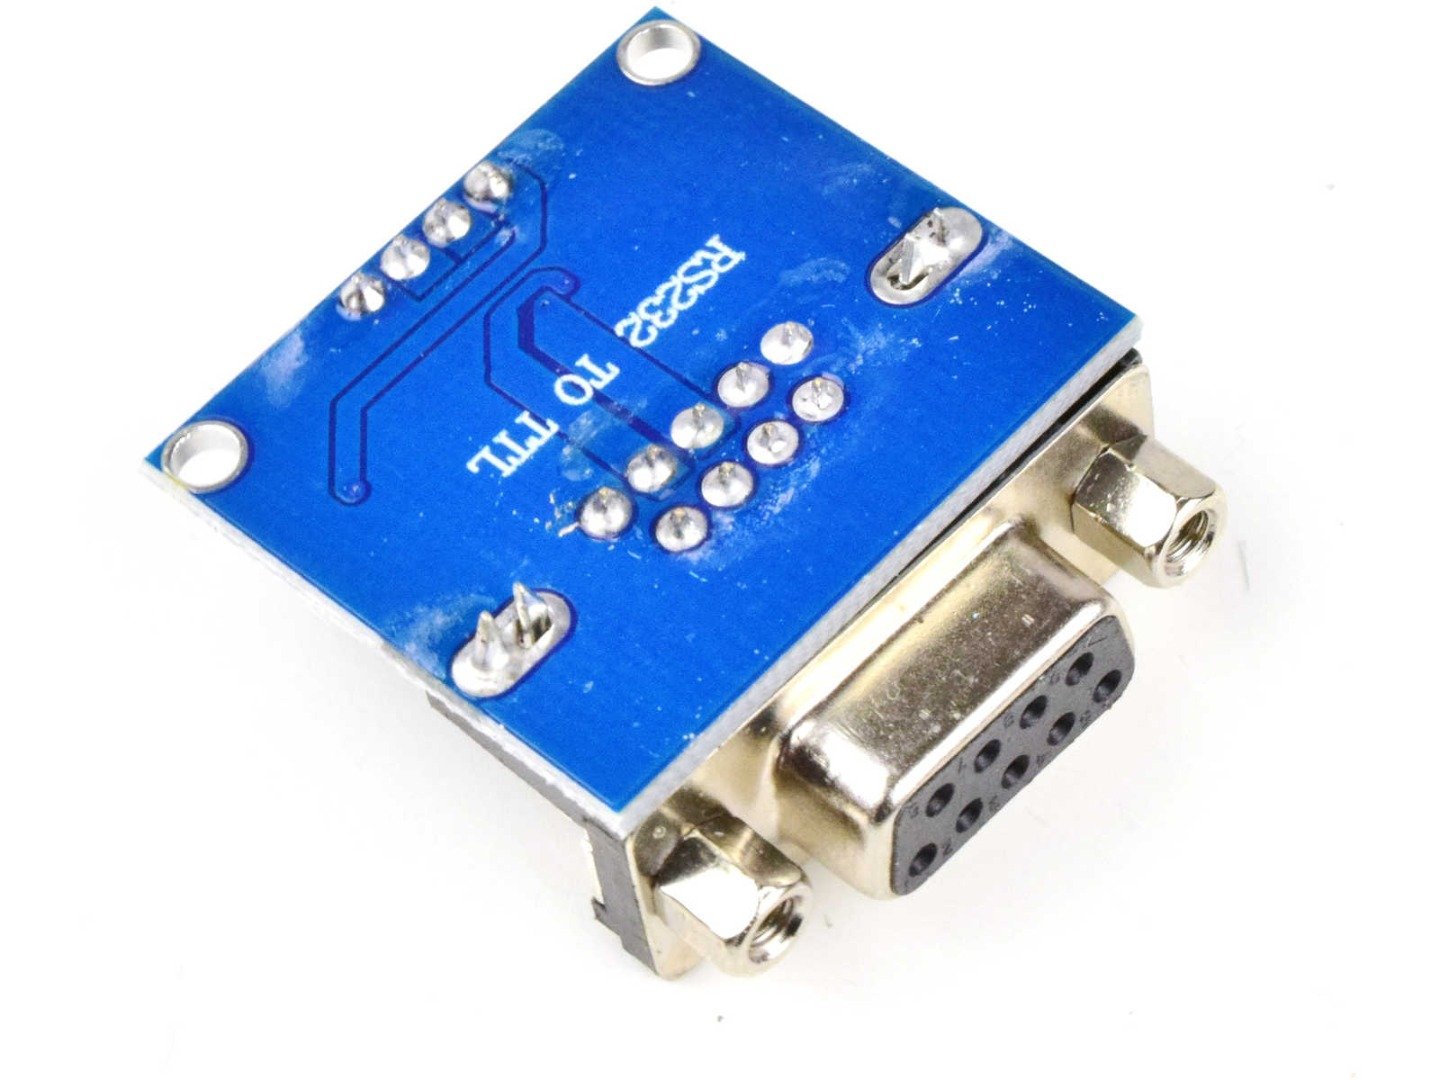 RS232 to TTL adapter MAX232, provides RS232 port for MCU or Arduino 5